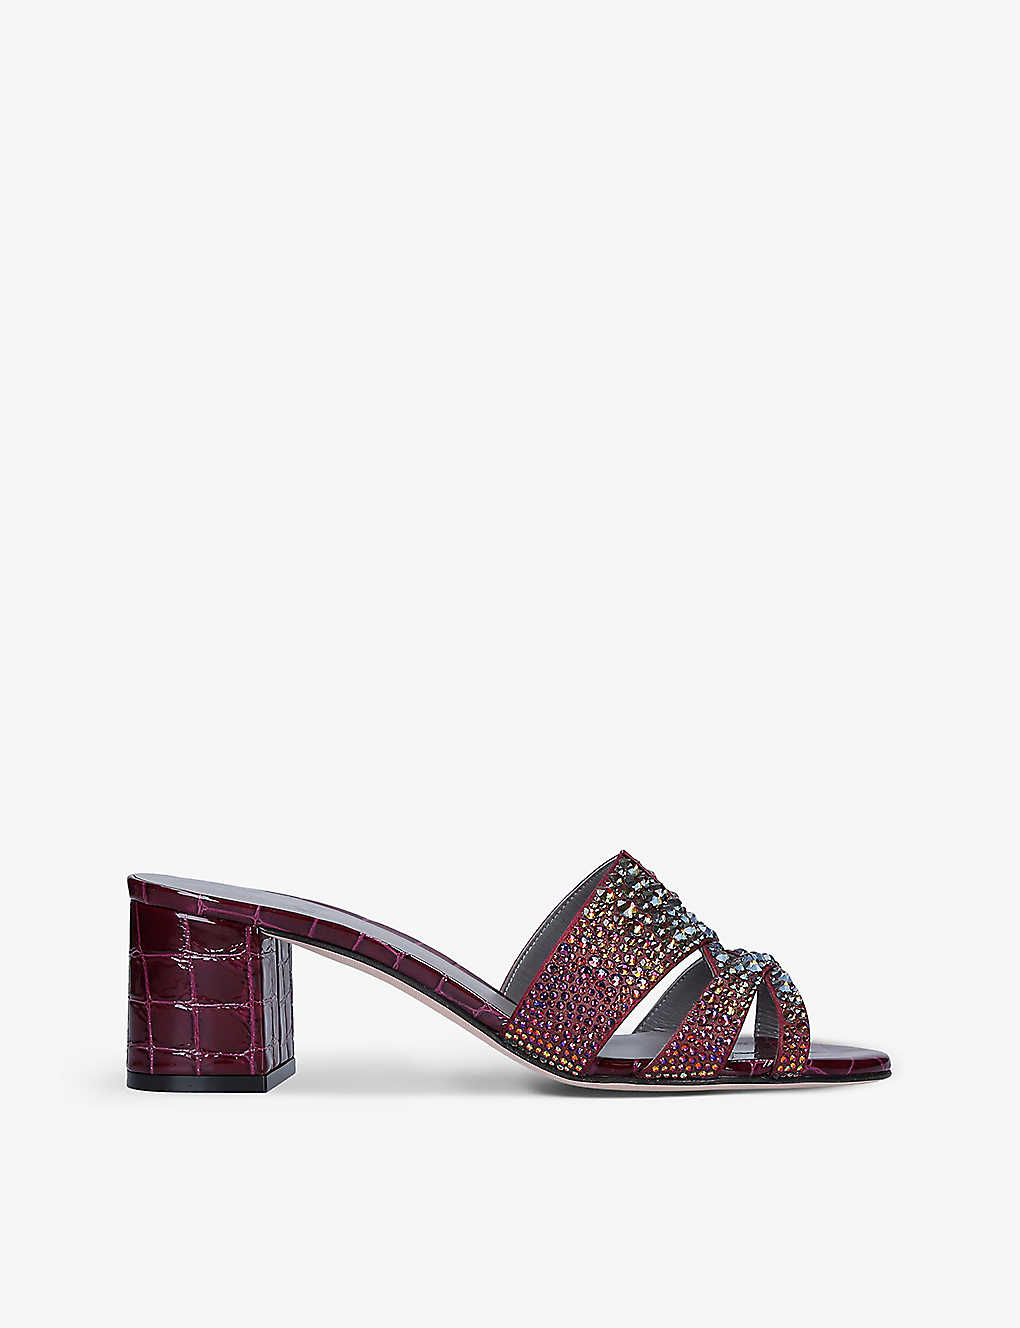 Shop Gina Women's Wine Comb Orsay Crystal-embellished Leather Sandals